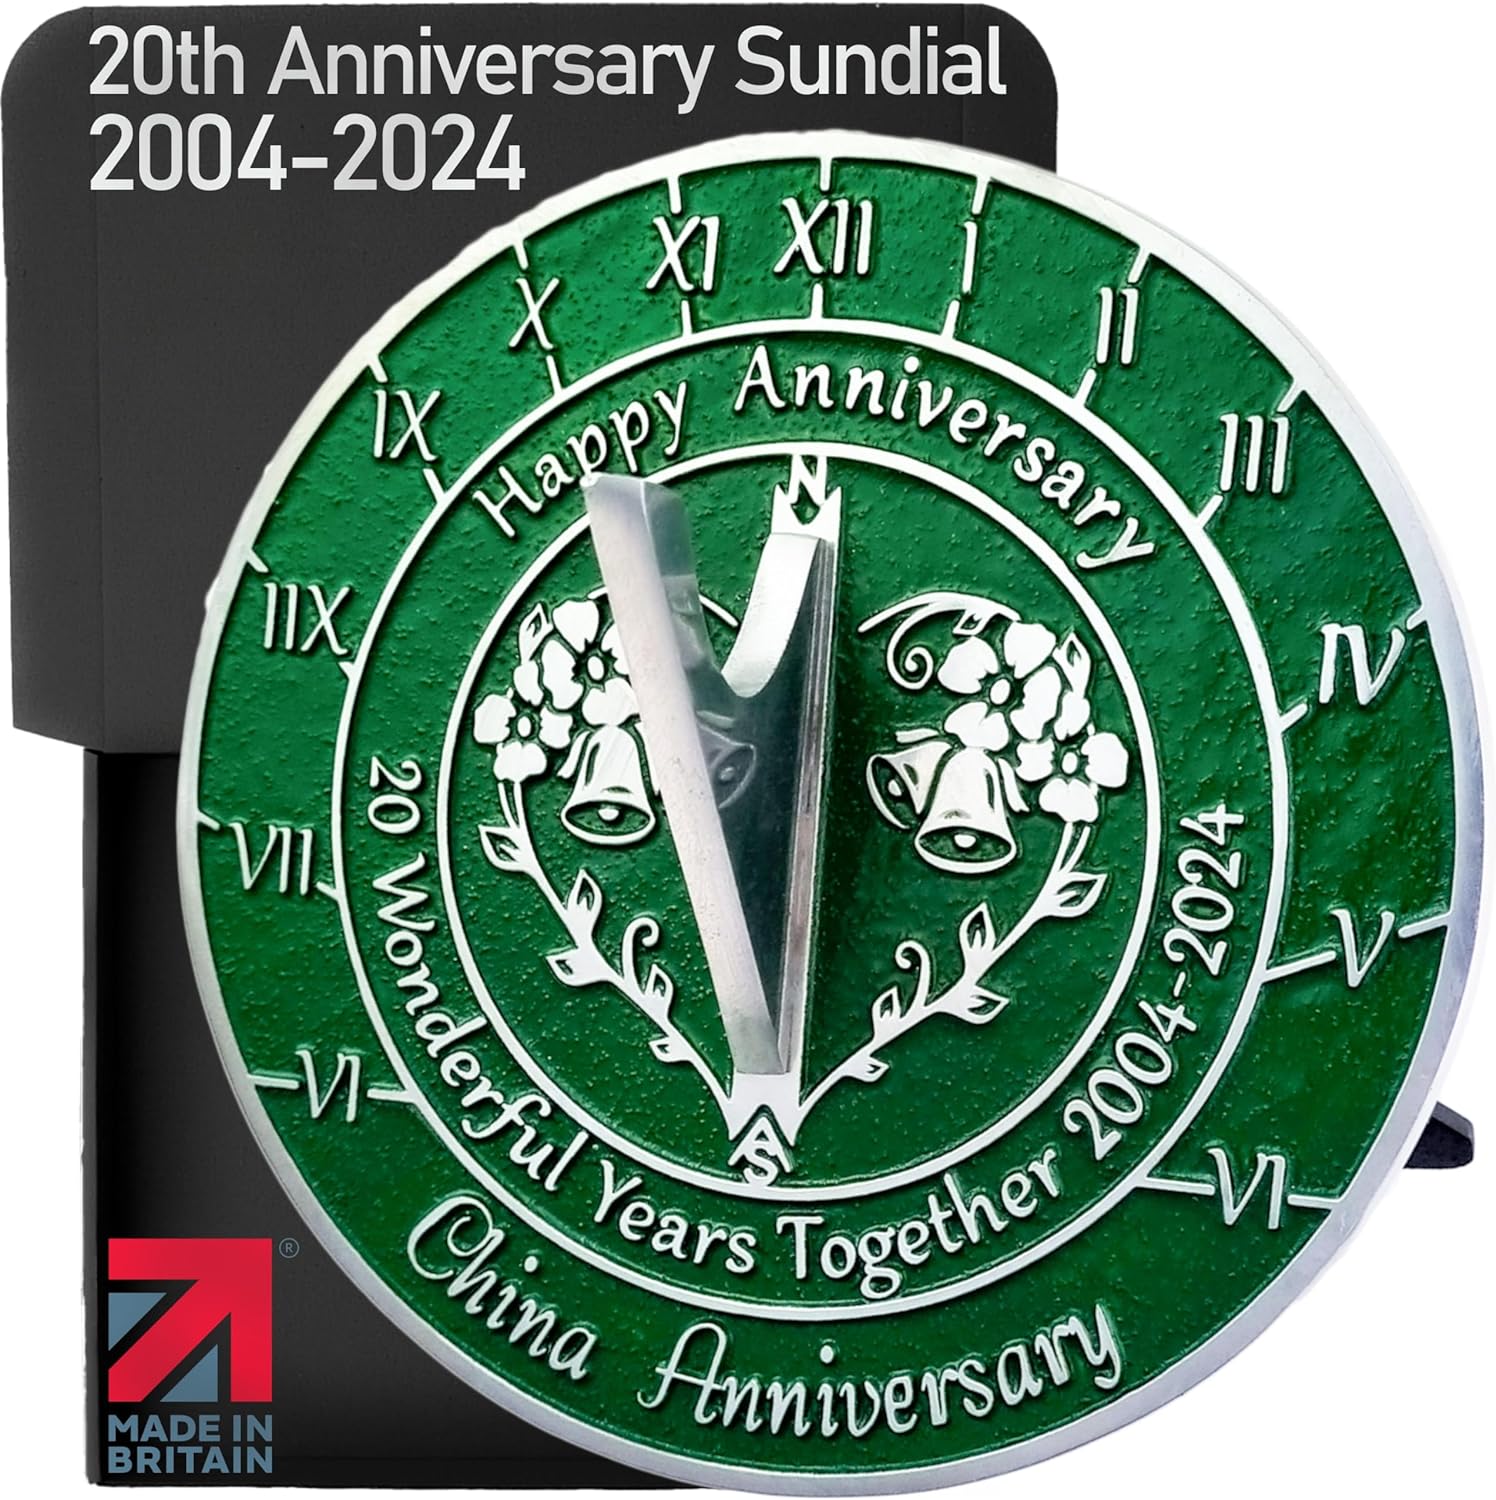 Anniversary Sundial Gift for 20th China Wedding Anniversary in 2024 - Recycled Metal Home Decor Or Garden Present Idea - Handmade in UK for Him, Her Parents Or Couples 20 Year Celebration